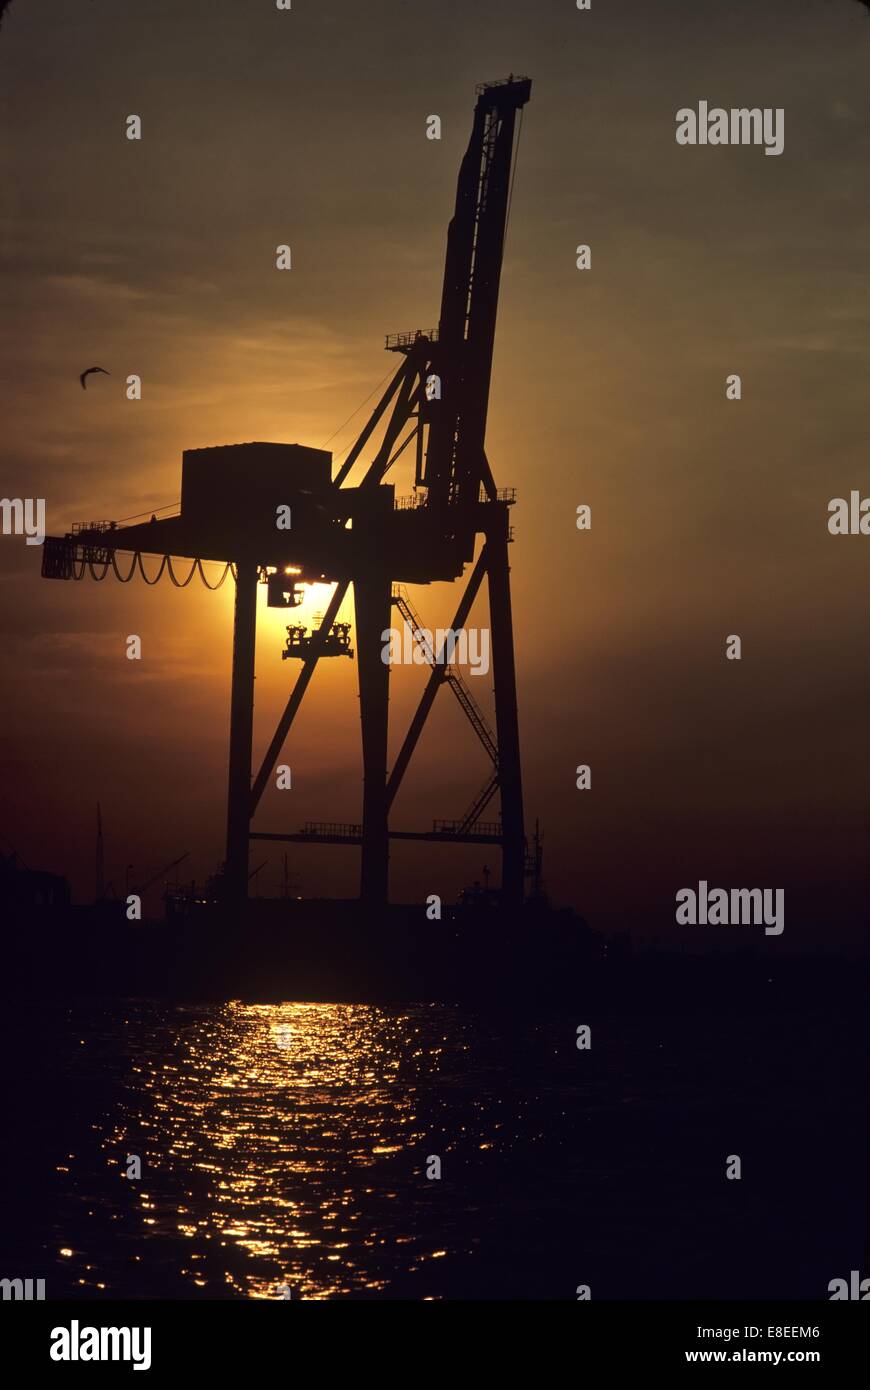 Offshore Platform with Crane at Sunset Stock Photo